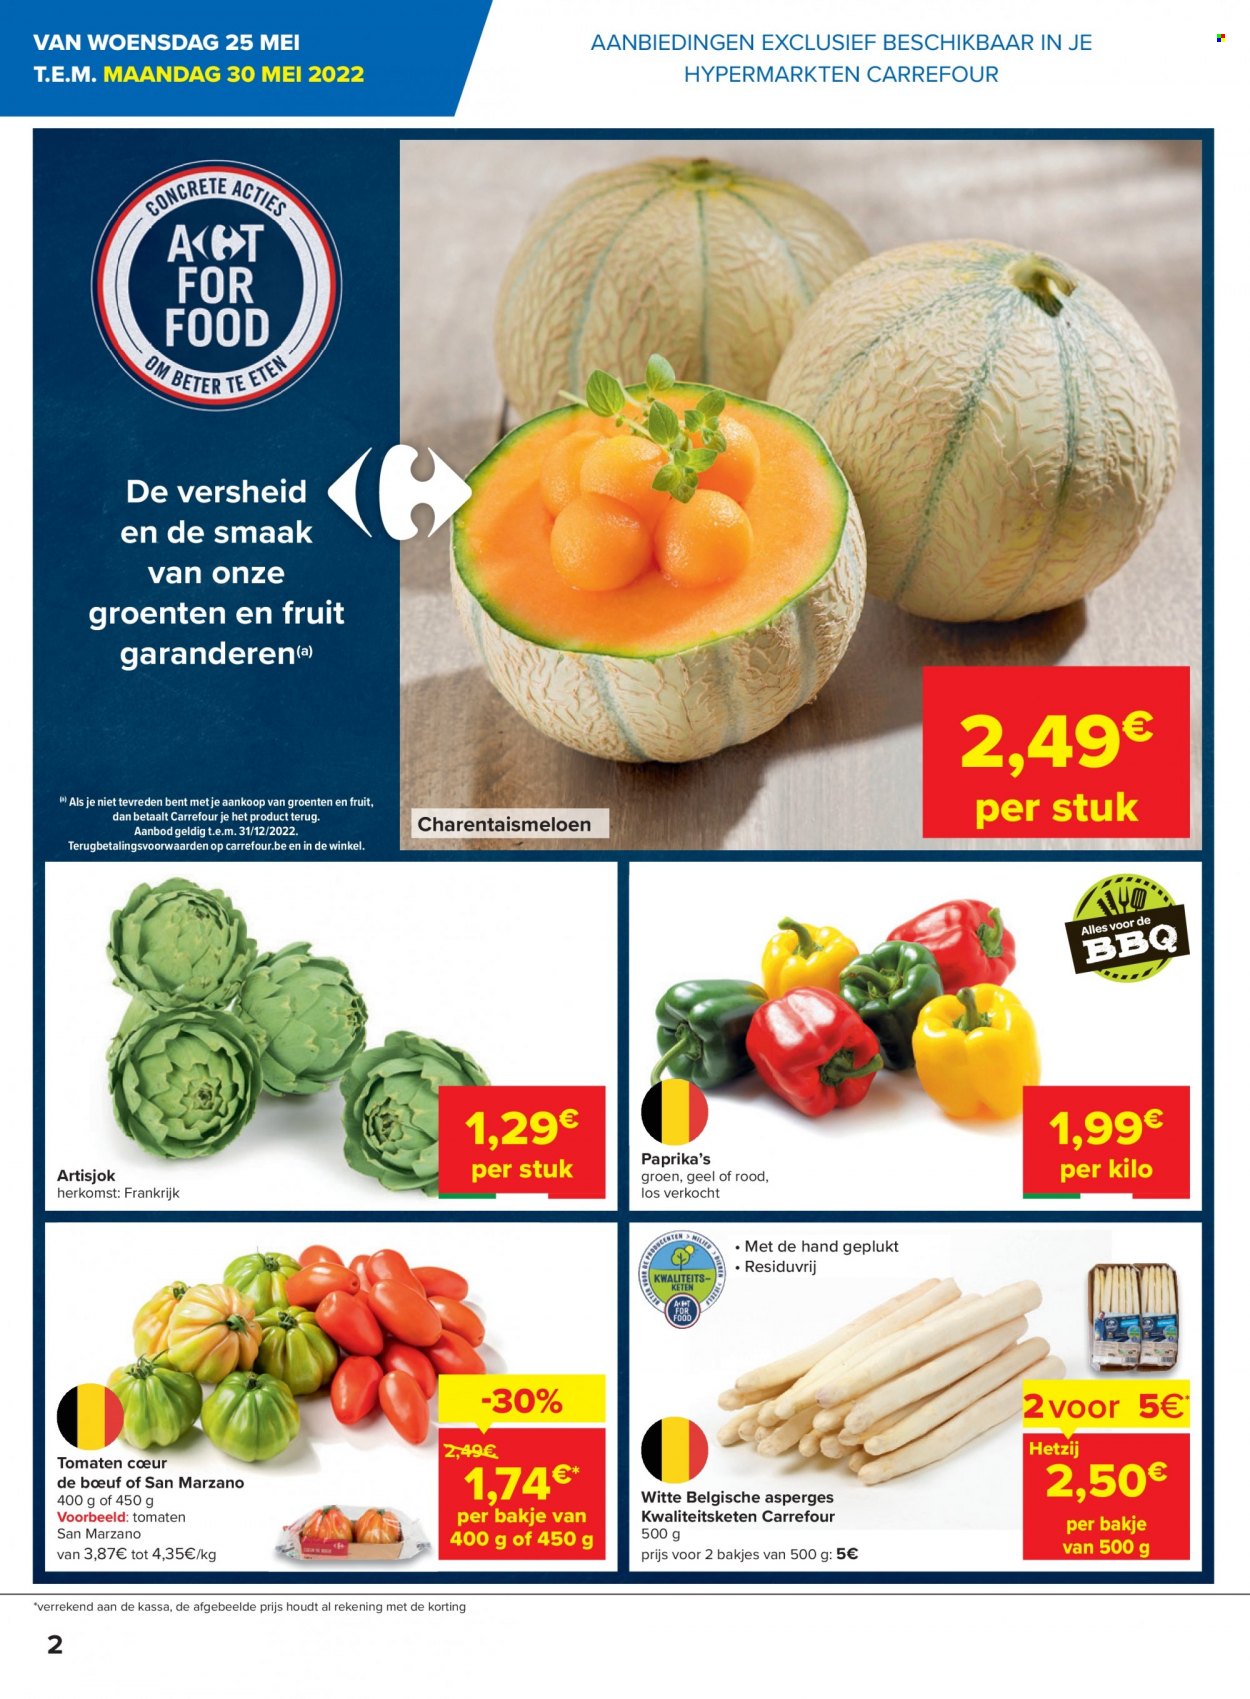 Catalogue Carrefour hypermarkt - 24.5.2022 - 30.5.2022. Page 2.